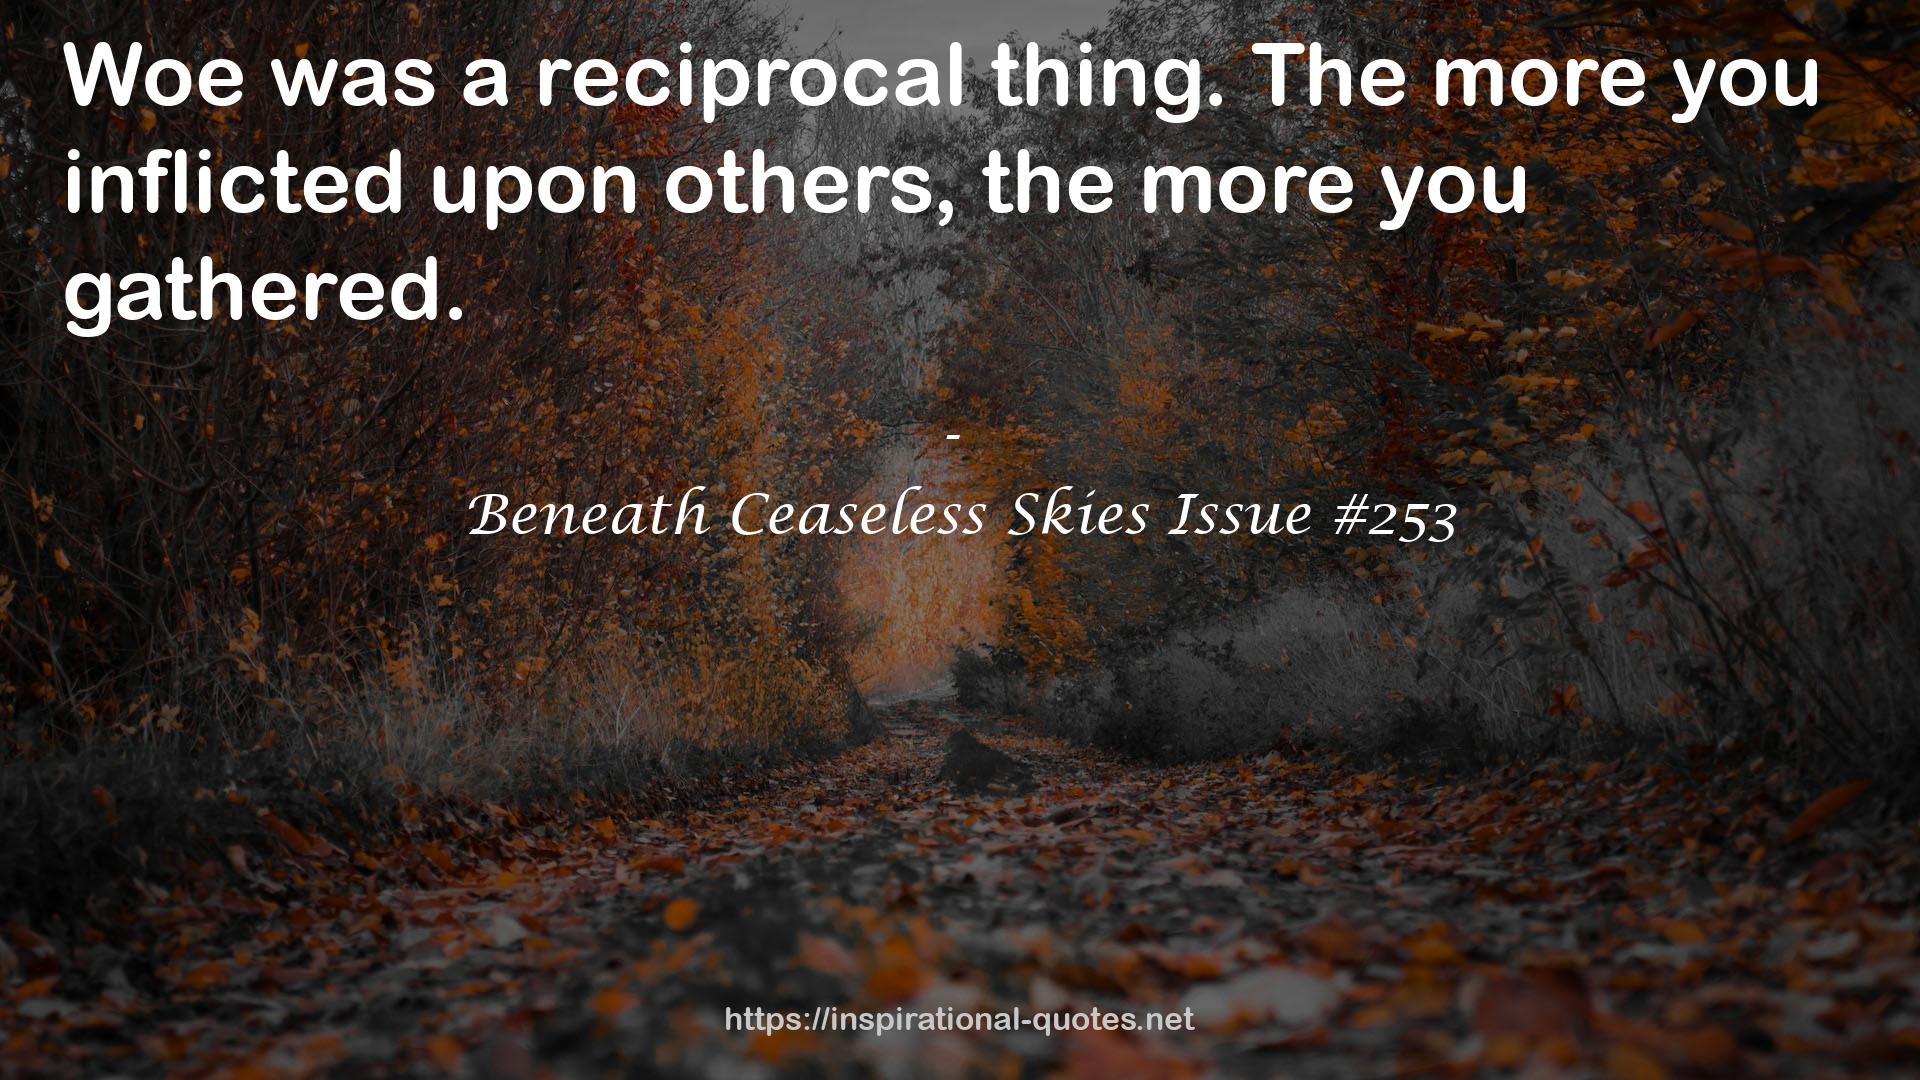 Beneath Ceaseless Skies Issue #253 QUOTES